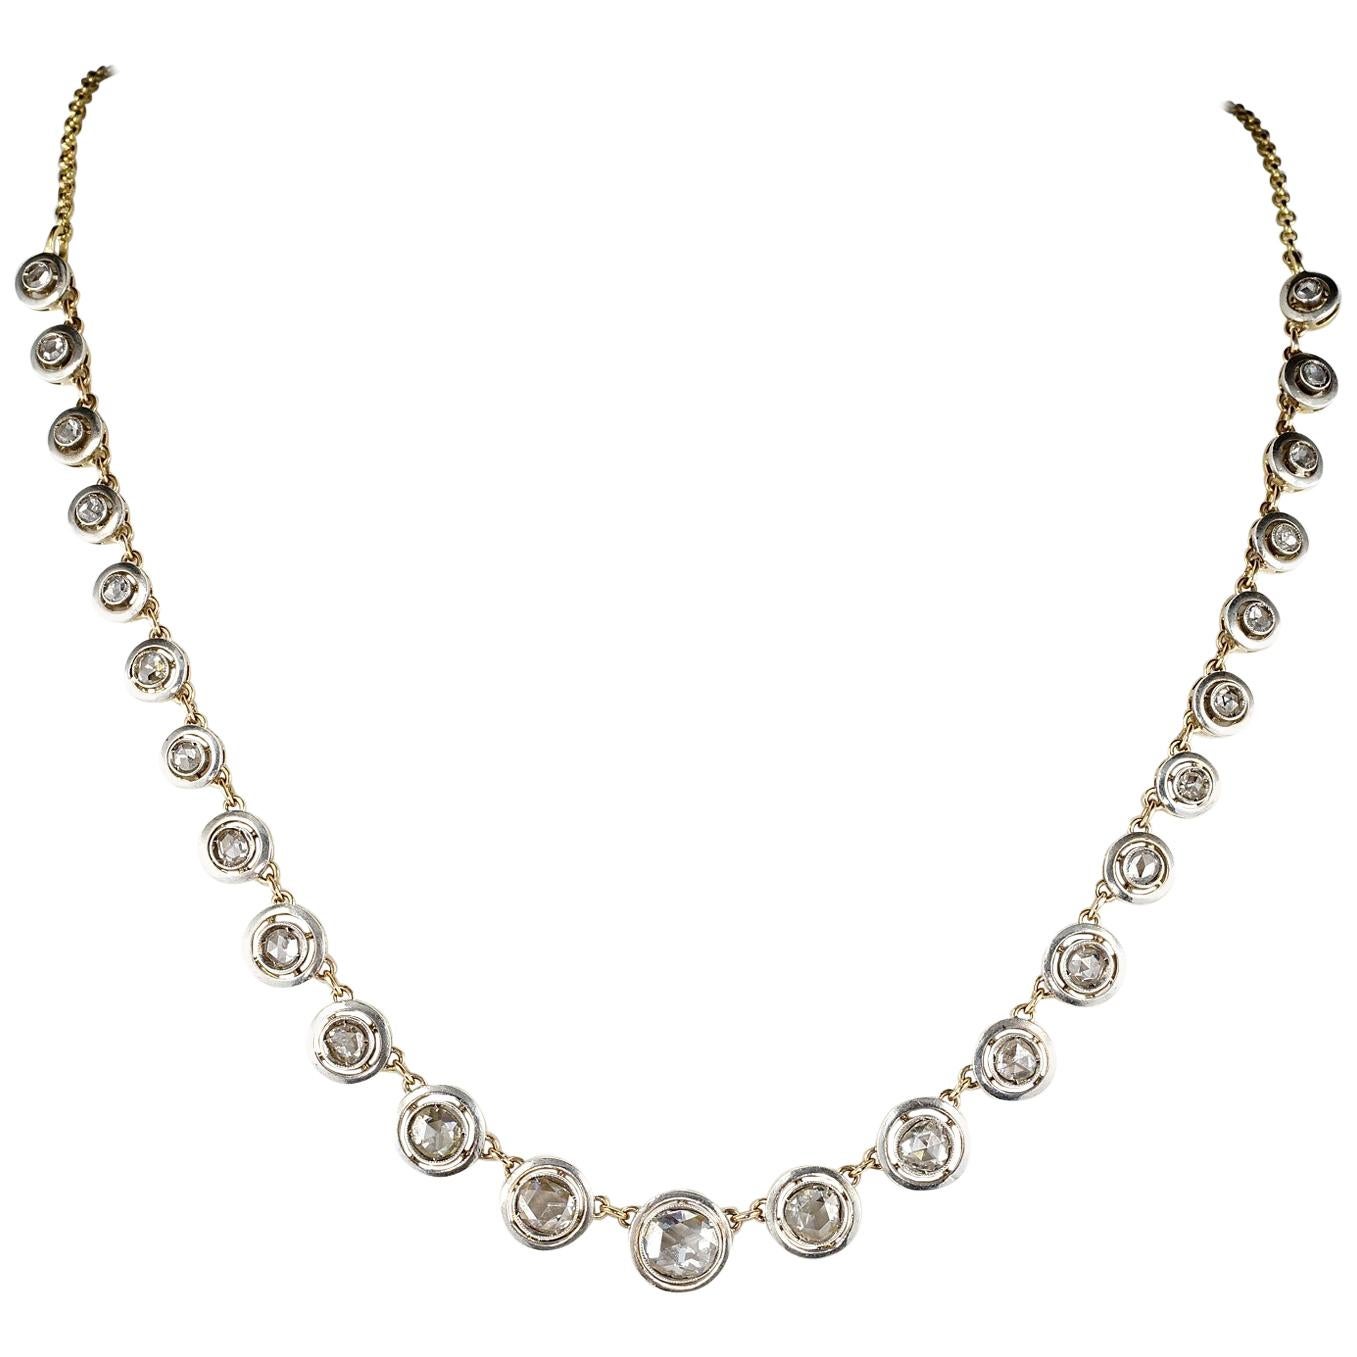 Antique Diamond Riviere Necklace of Target Design For Sale